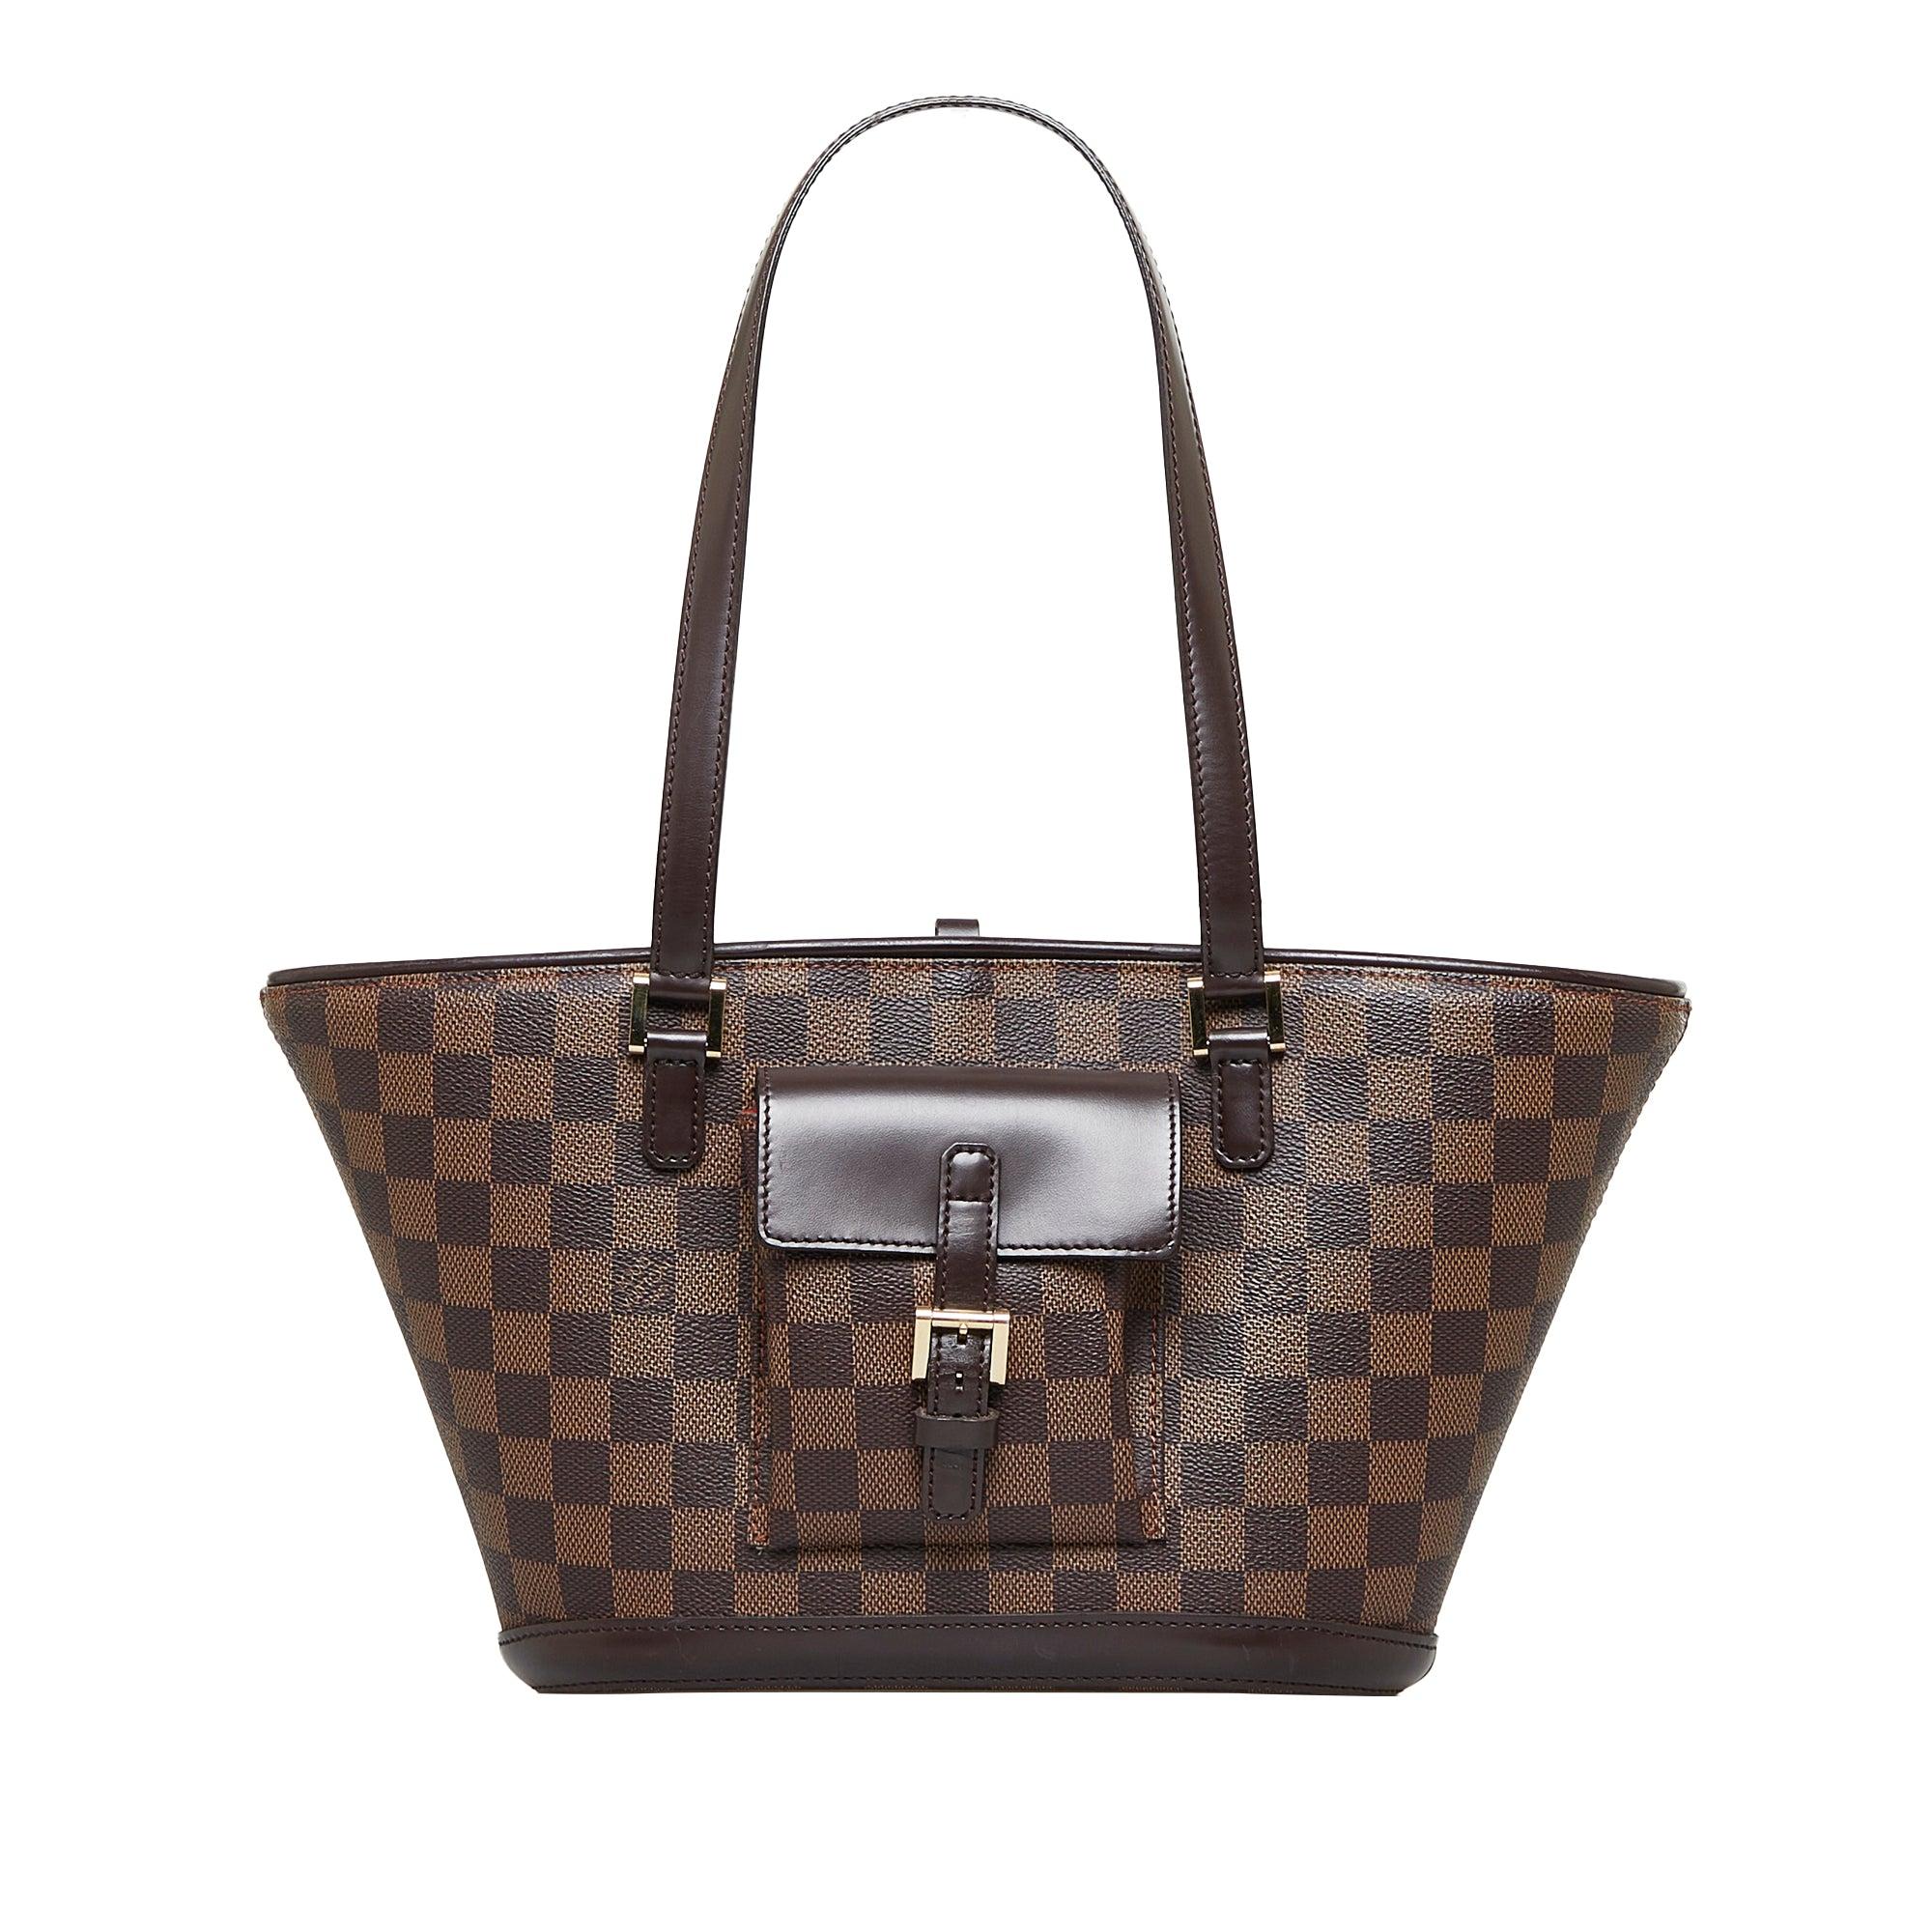 Louis Vuitton Damier Ebene Manosque Pm Canvas Tote Bag (pre-owned) in Brown